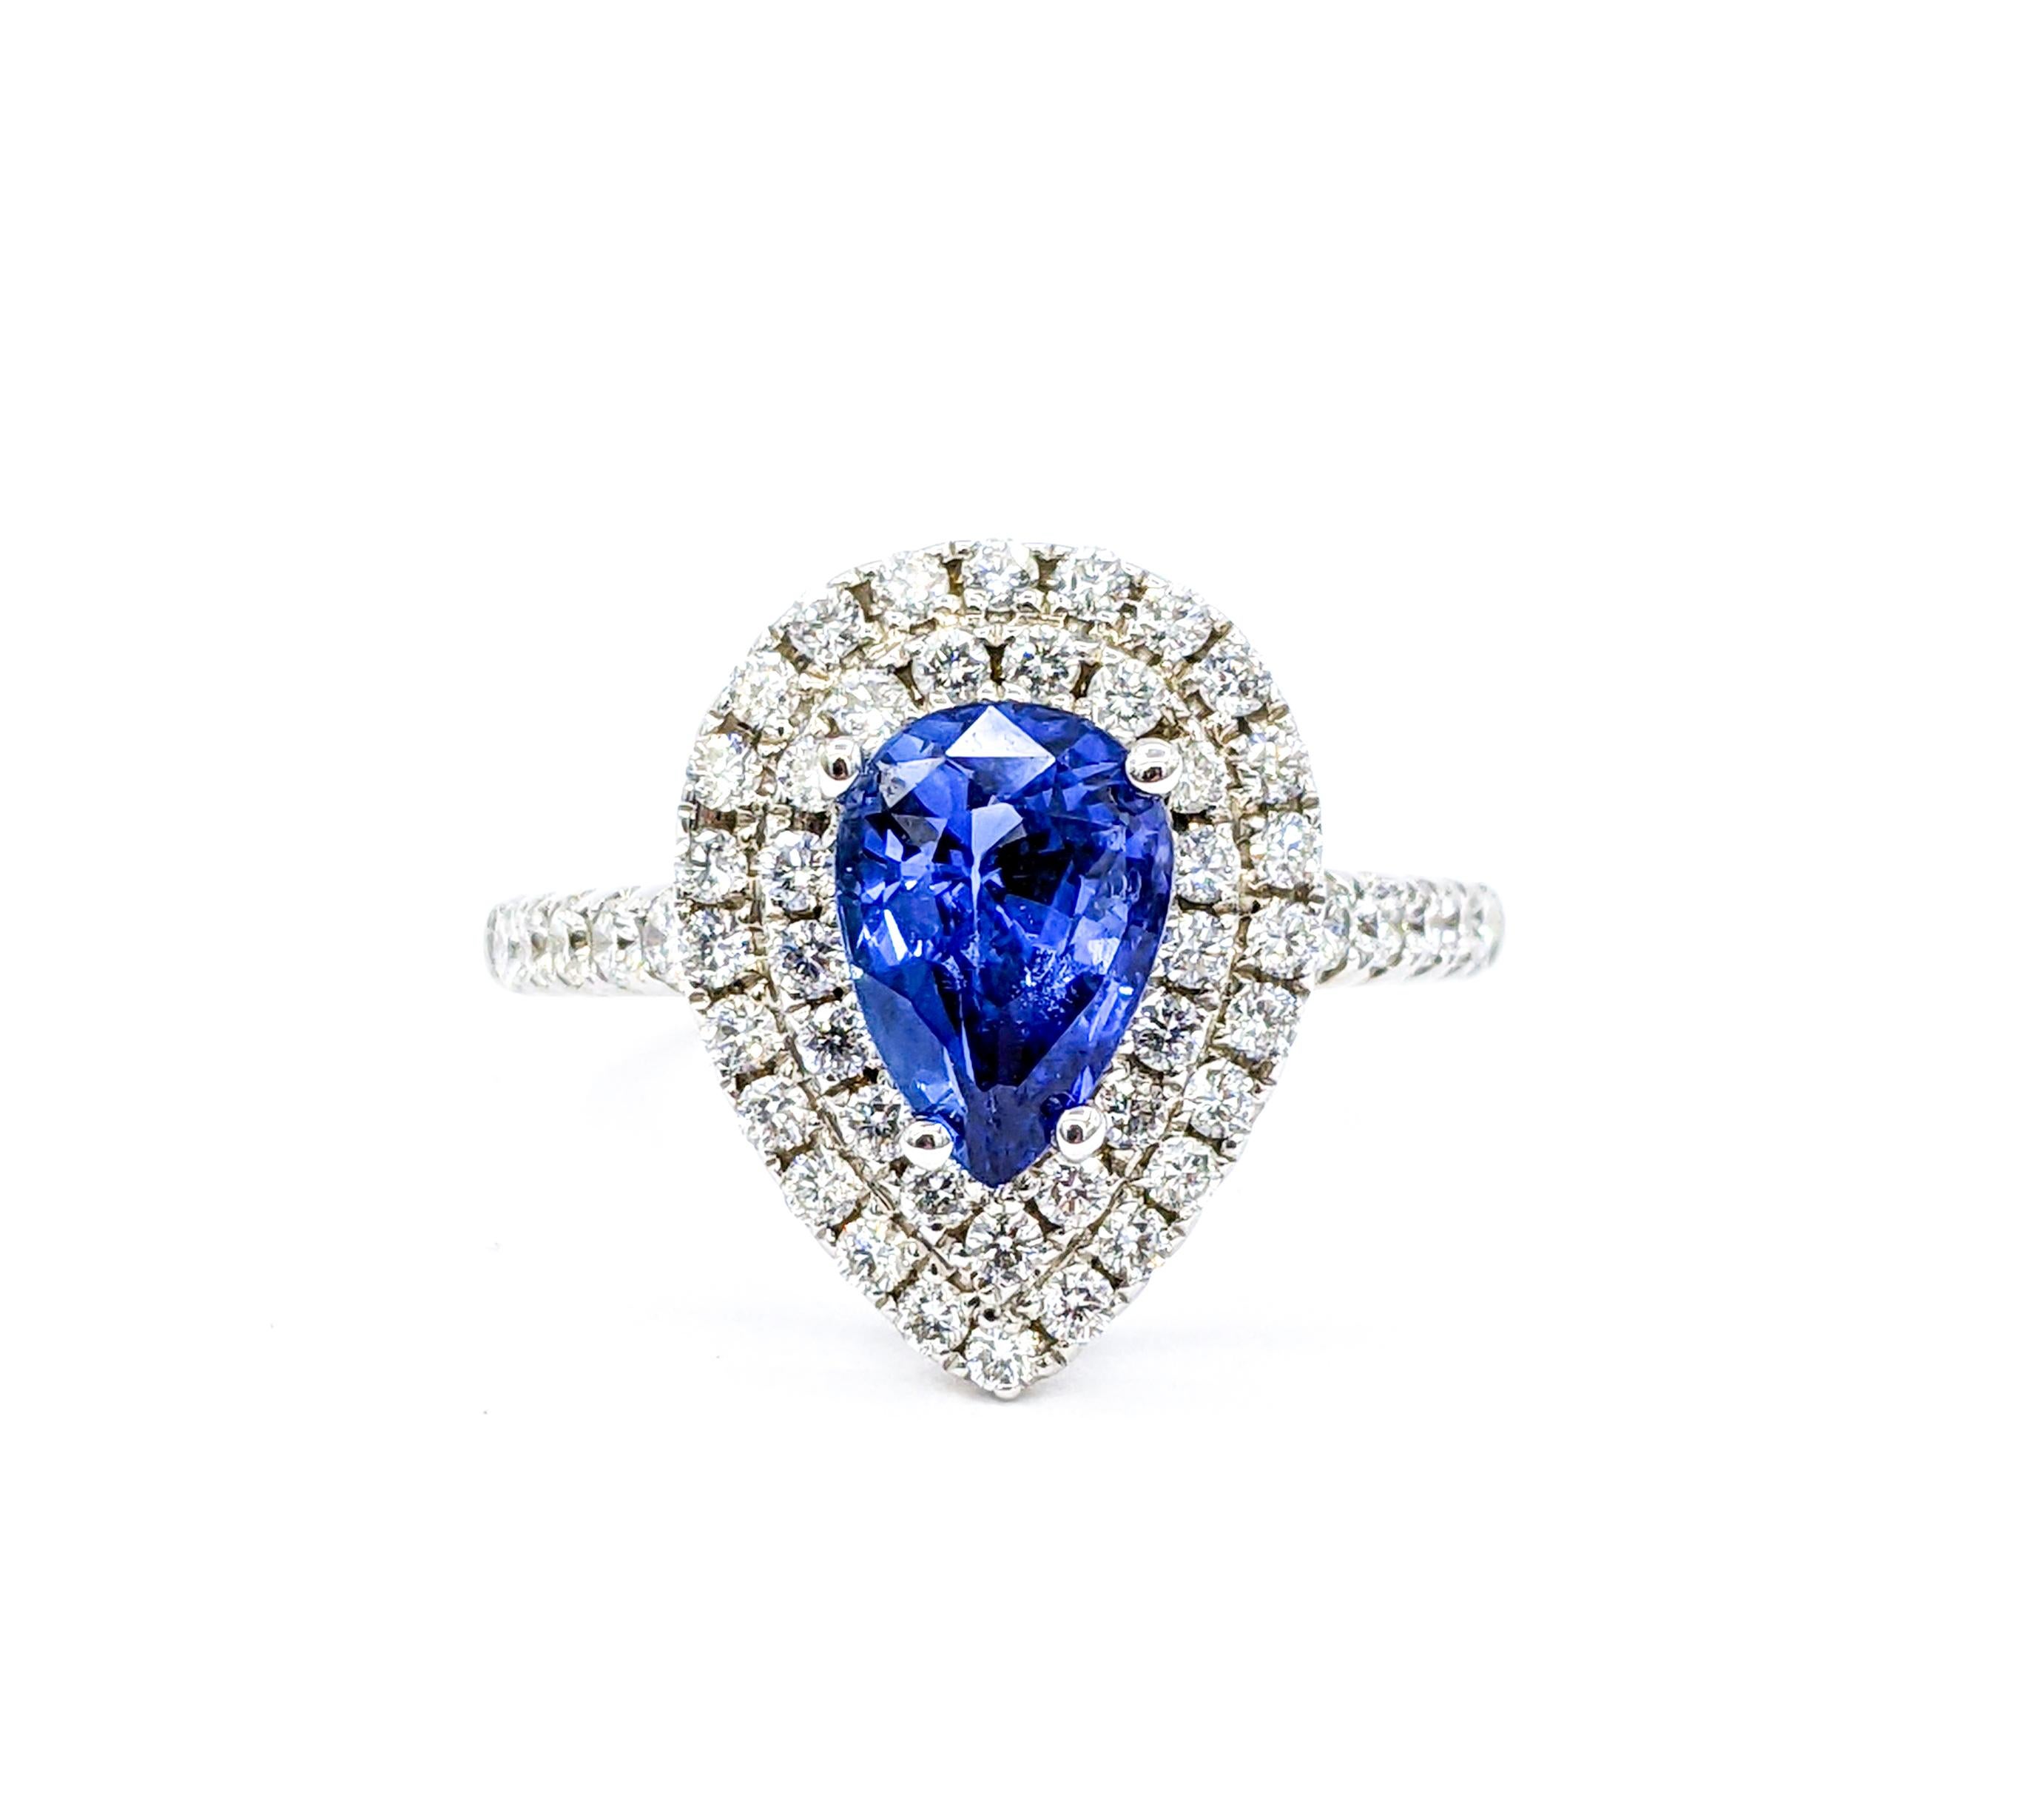 Stunning 2.00ct Sapphire & Diamond Cocktail Ring - 18K White Gold For Sale 4